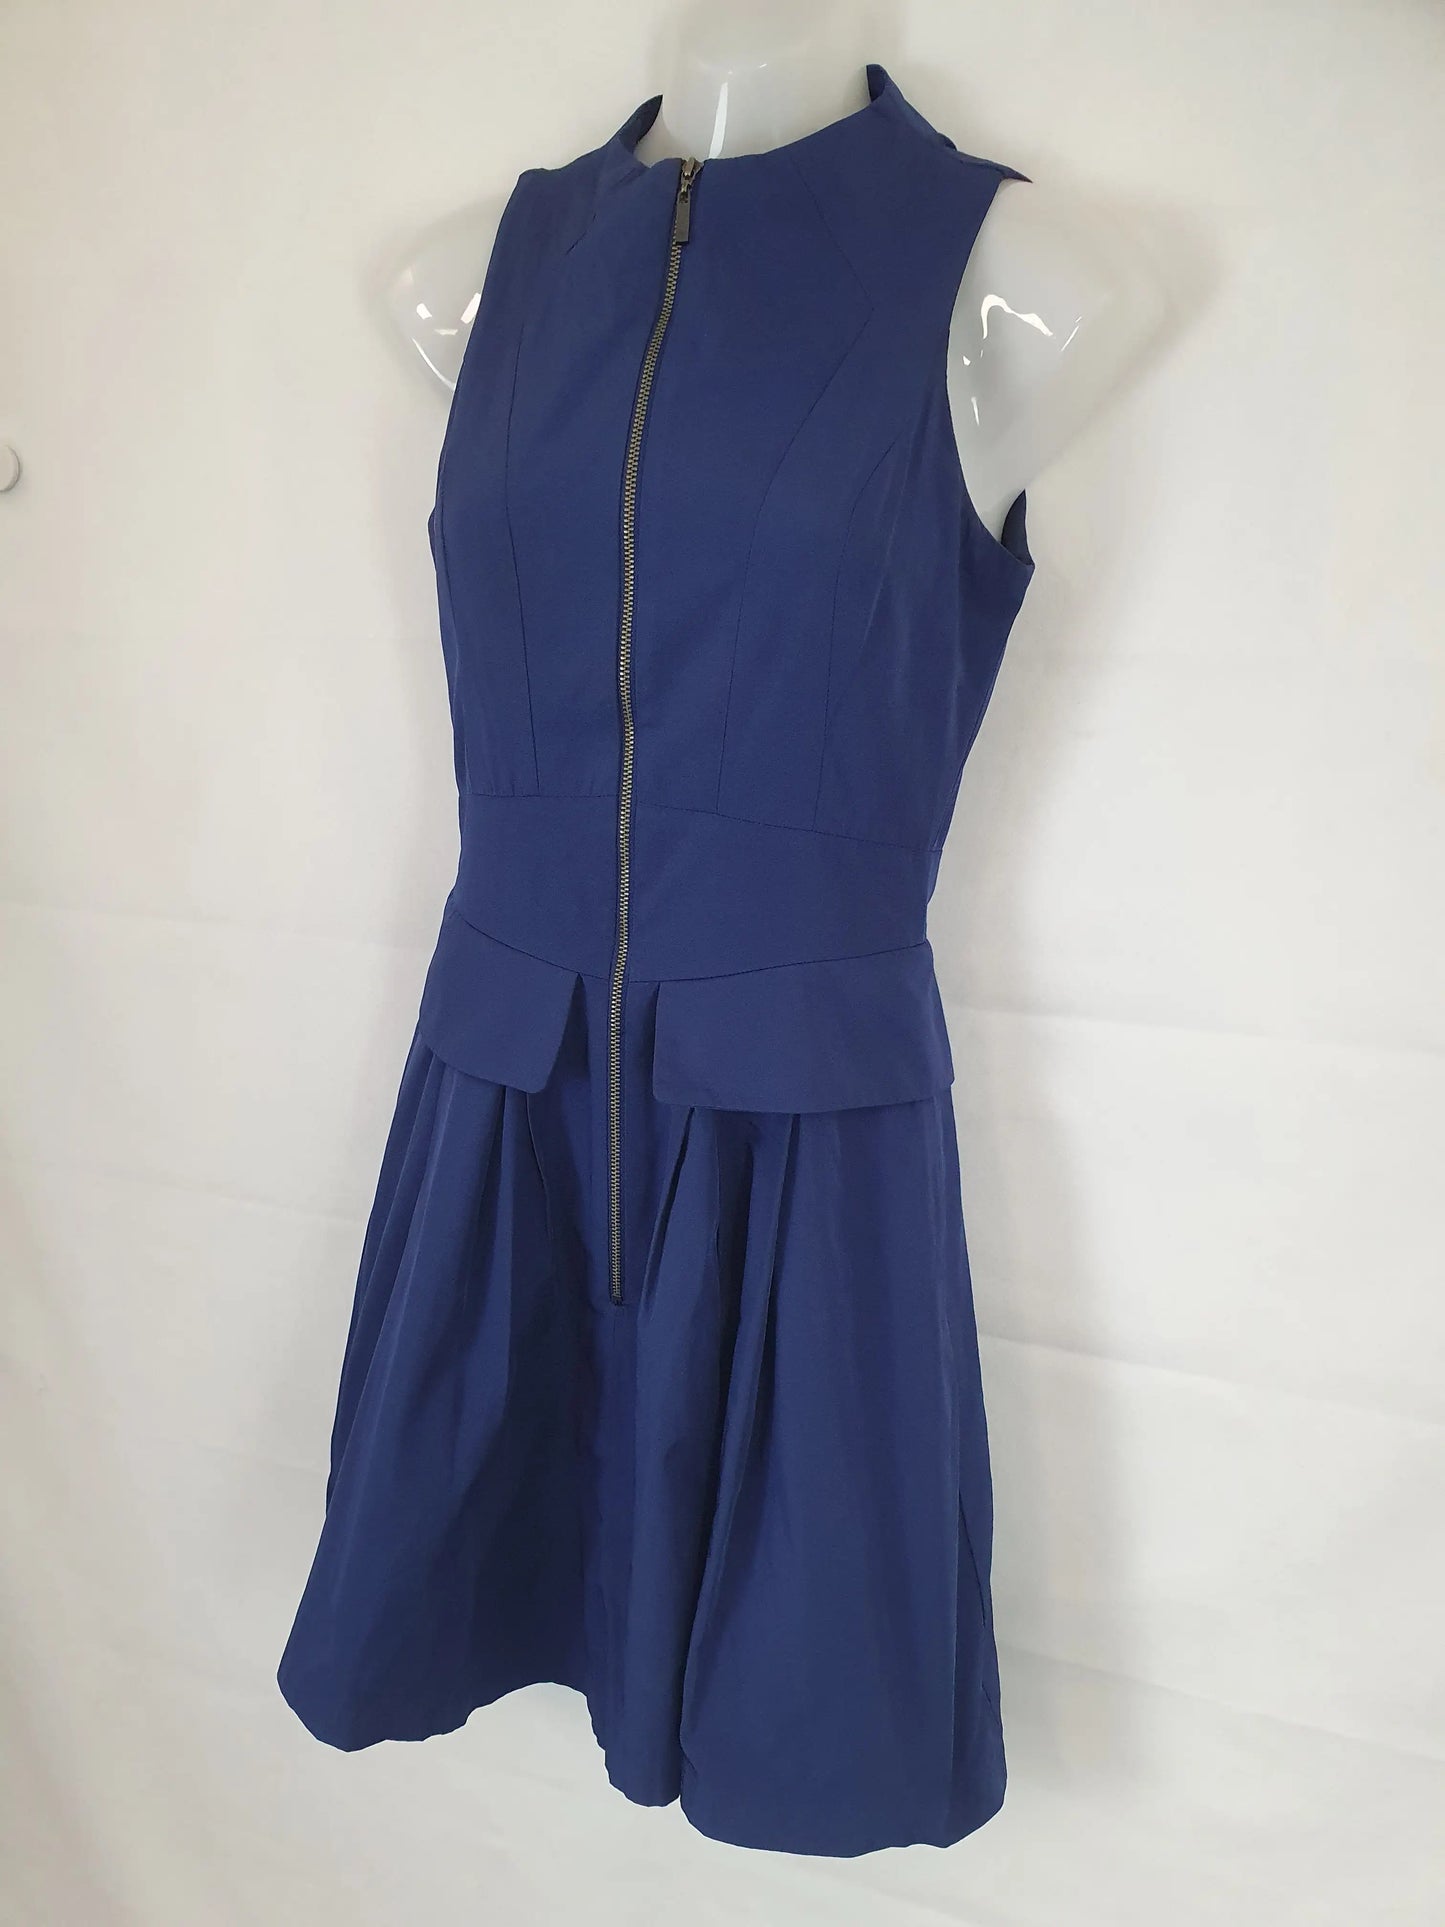 Cue Pocket Midi Dress Size 6 by SwapUp-Second Hand Shop-Thrift Store-Op Shop 